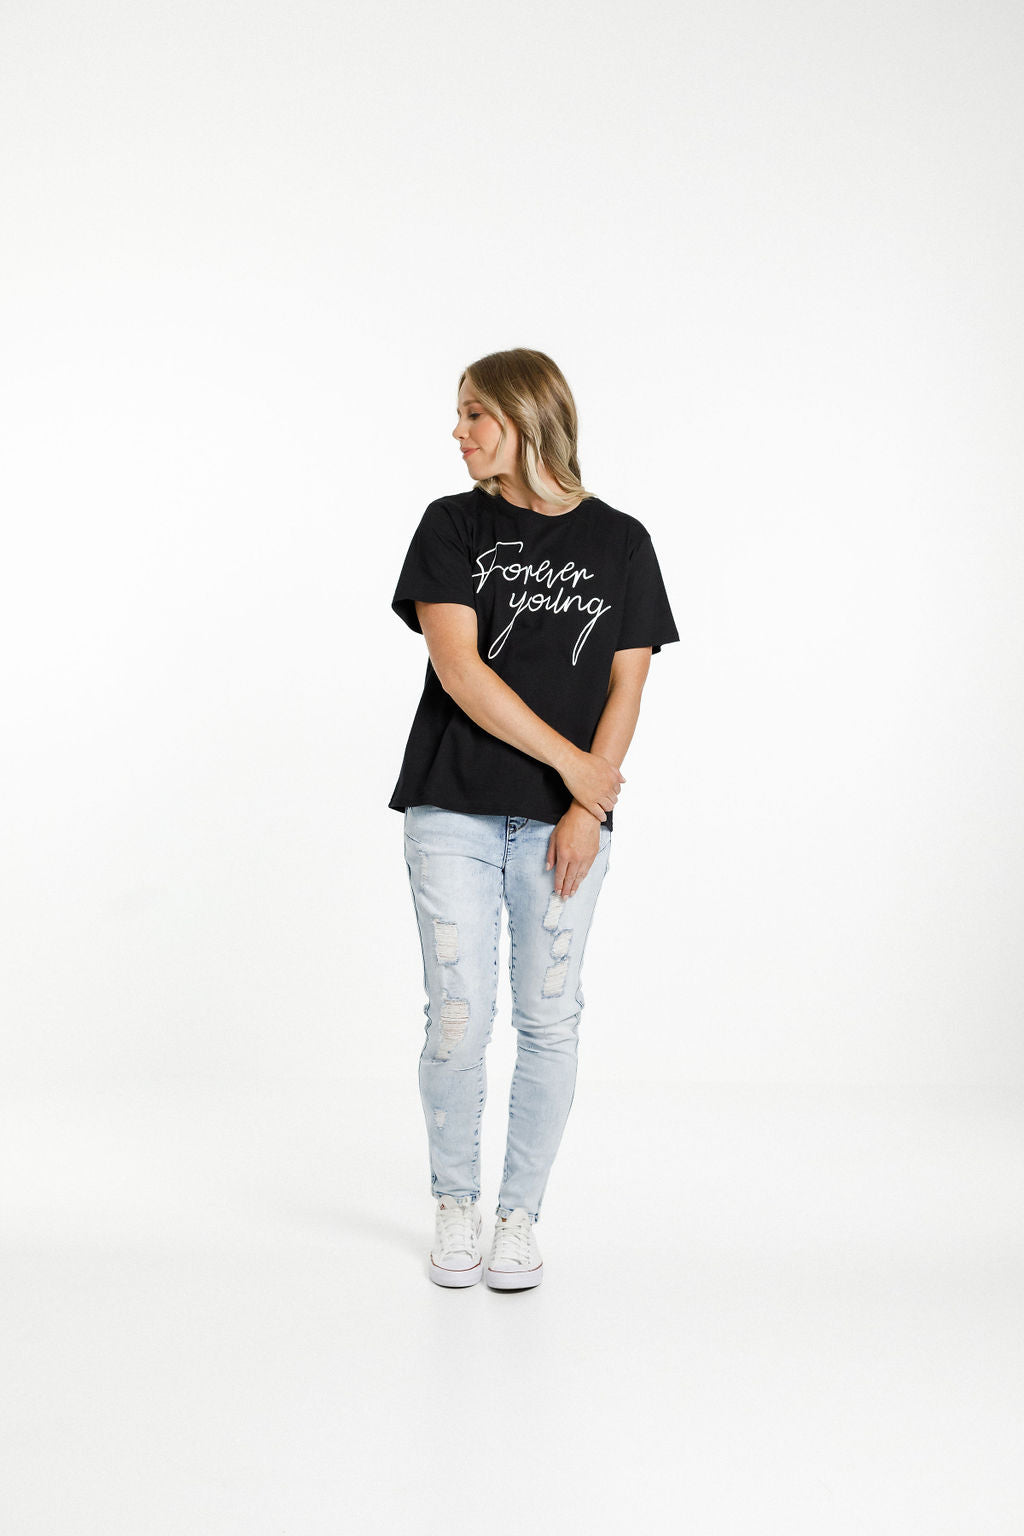 Chris Tee - Sale - Black with White Forever Young